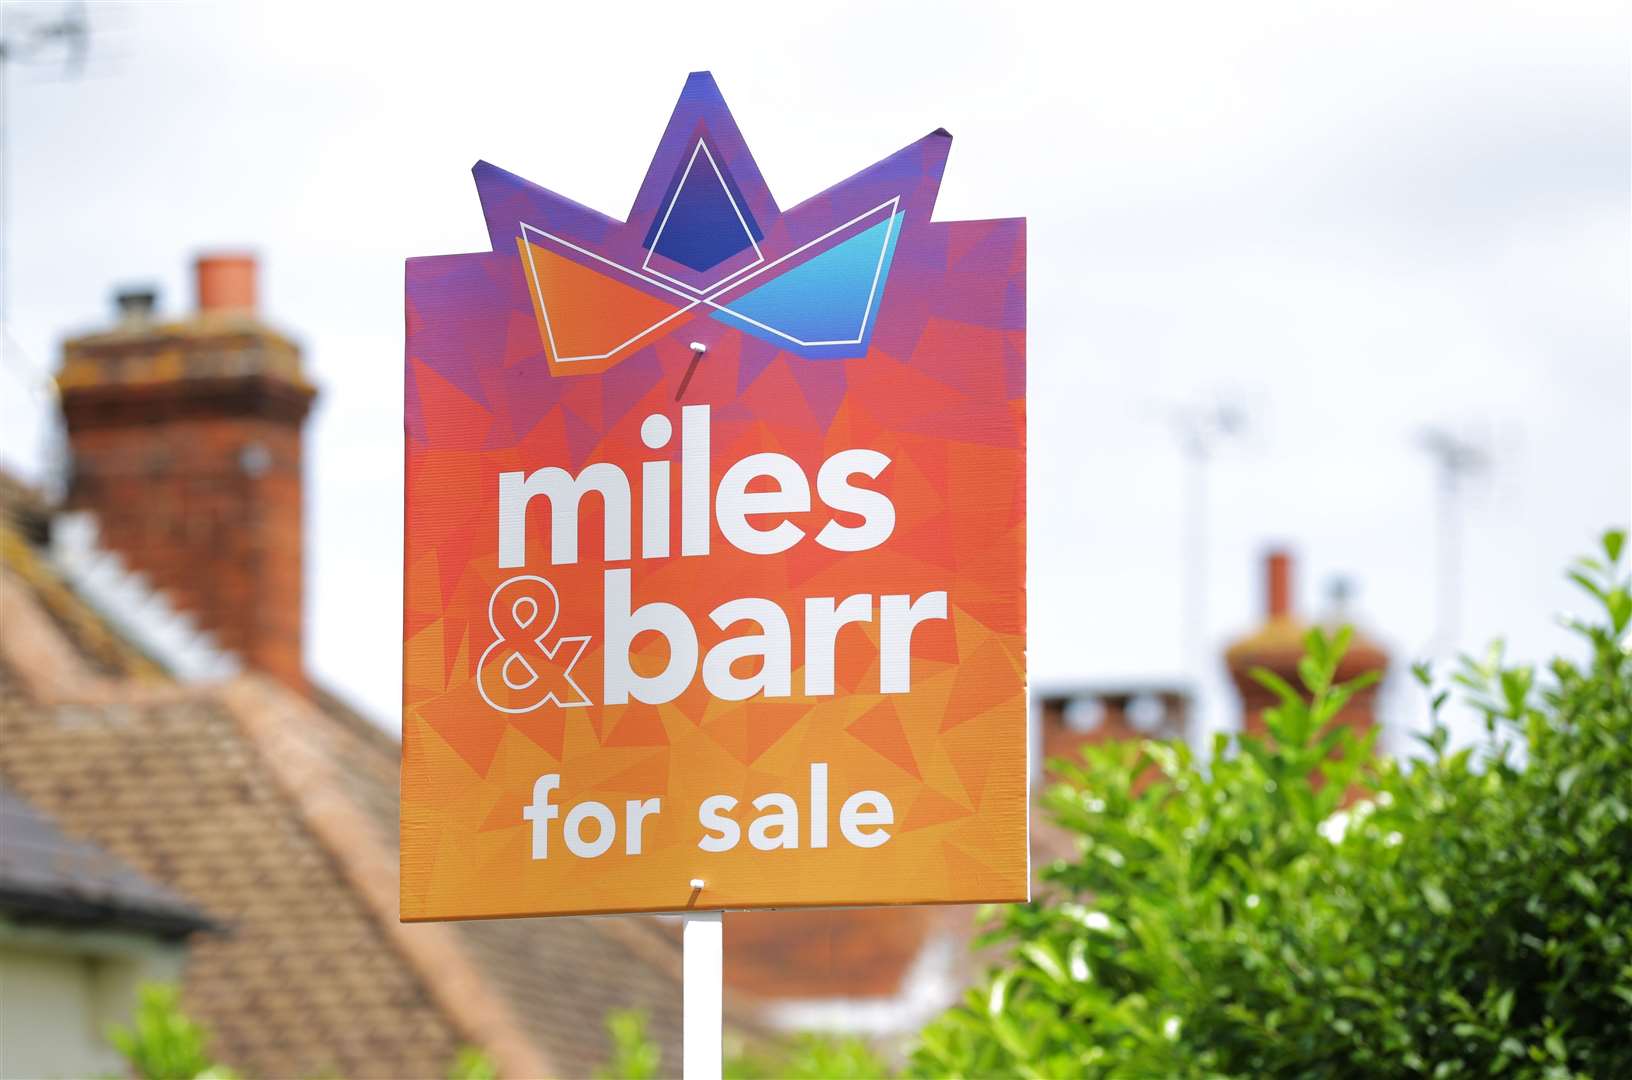 Miles & Barr is returning to Ashford for the first time since 2008